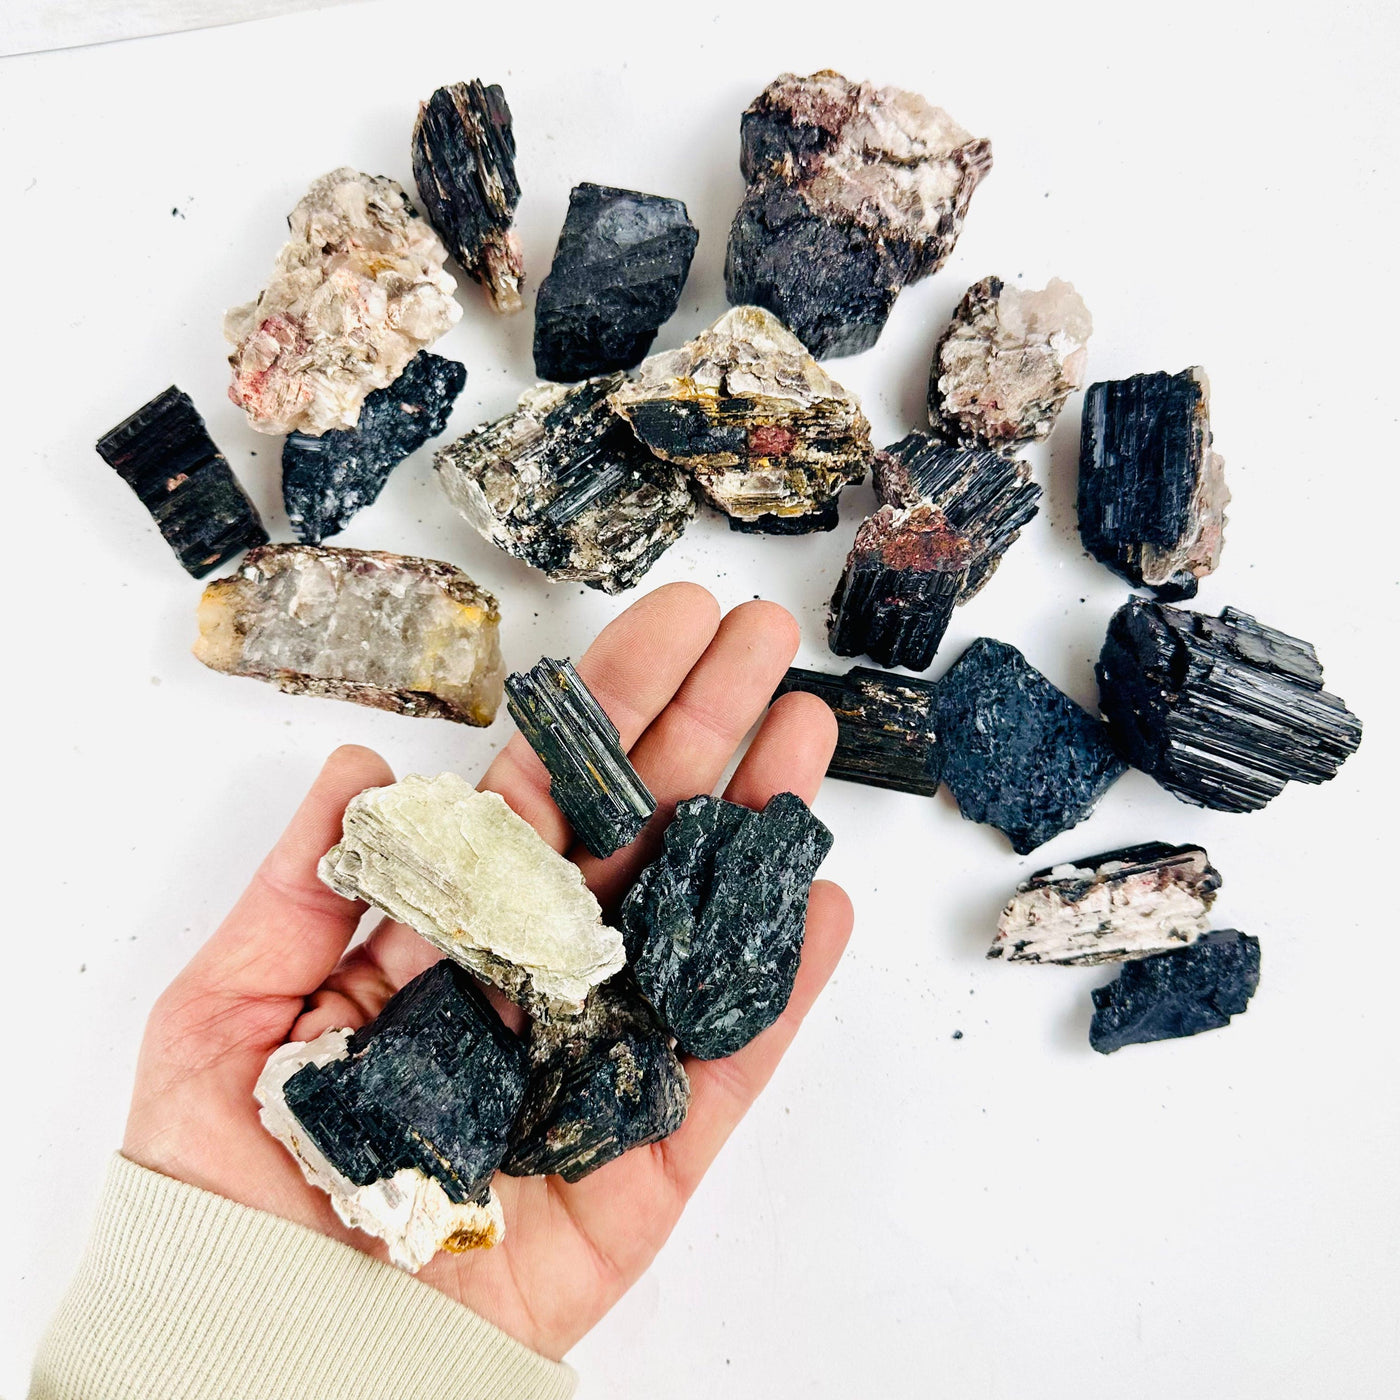 Black Tourmaline, on Matrix and Mica - Rough Assorted Size - 1 KILO worth with some in a hand for size reference